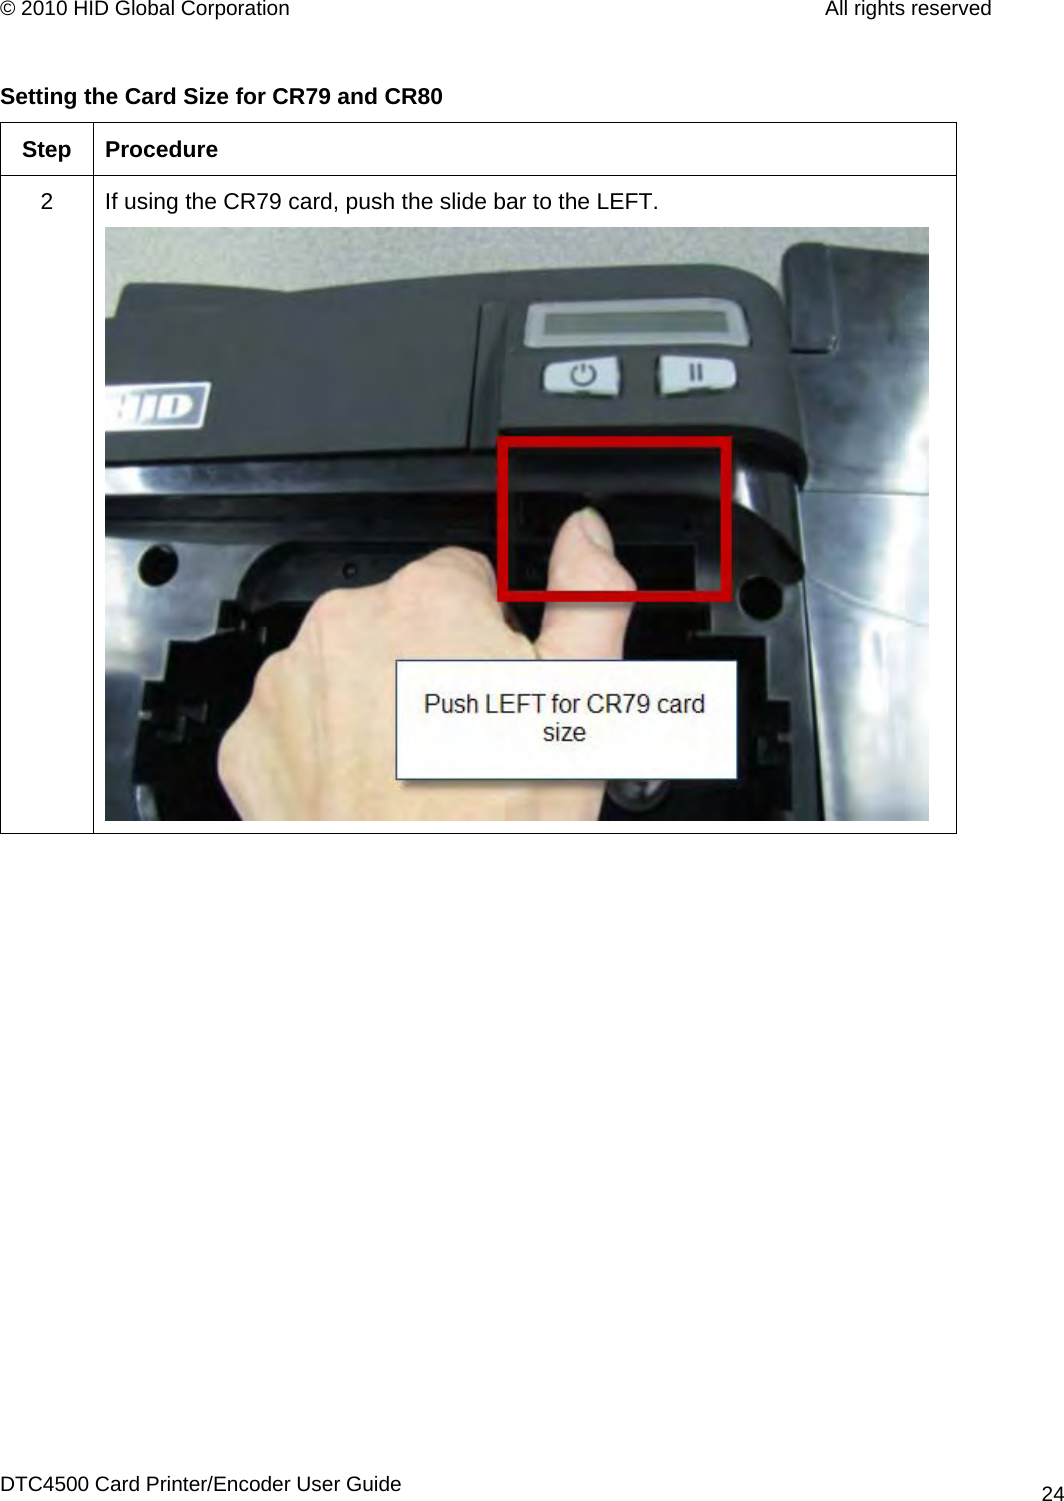 © 2010 HID Global Corporation         All rights reserved  Setting the Card Size for CR79 and CR80 Step Procedure 2  If using the CR79 card, push the slide bar to the LEFT.  DTC4500 Card Printer/Encoder User Guide 24